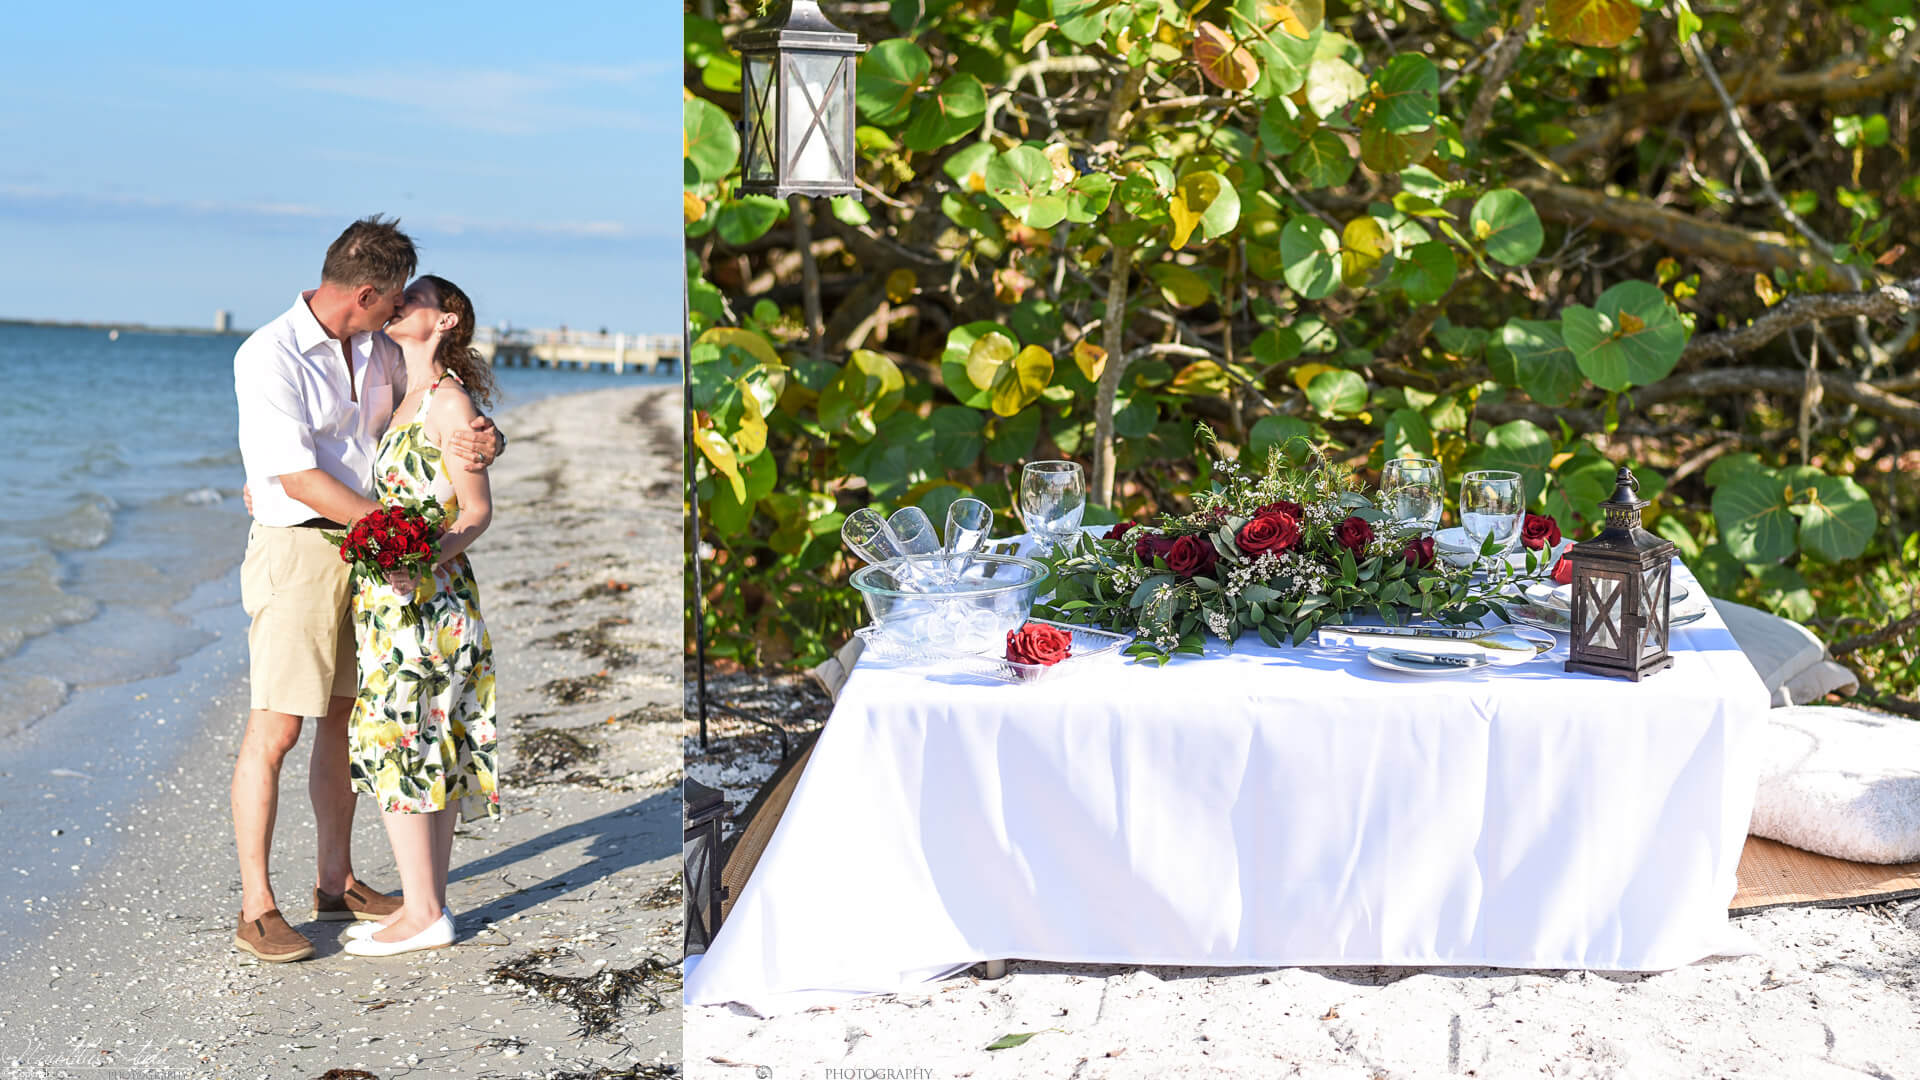 Florida vow renewal photo of couple on the beach and their vow renewal beach picnic